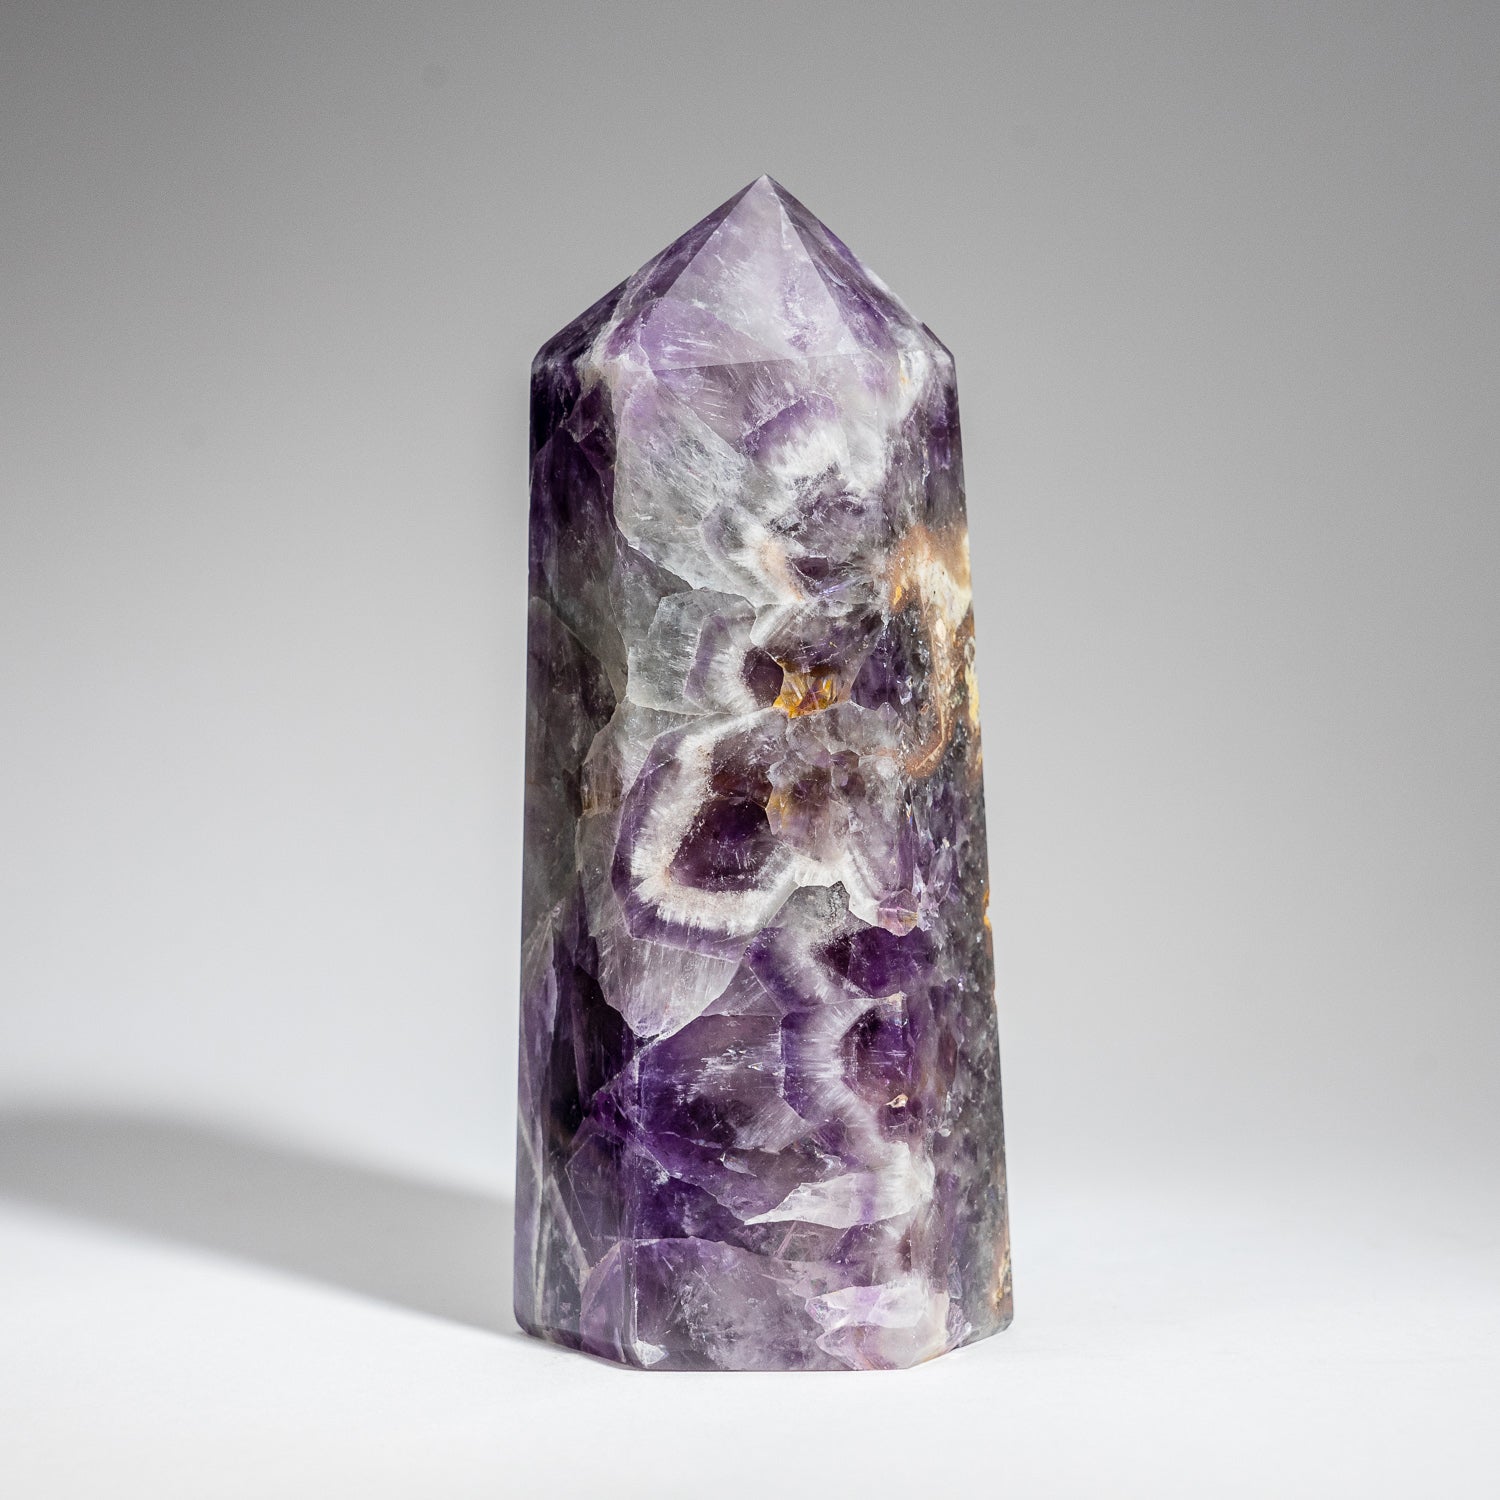 Polished Amethyst Crystal Point From Brazil (3 lbs)